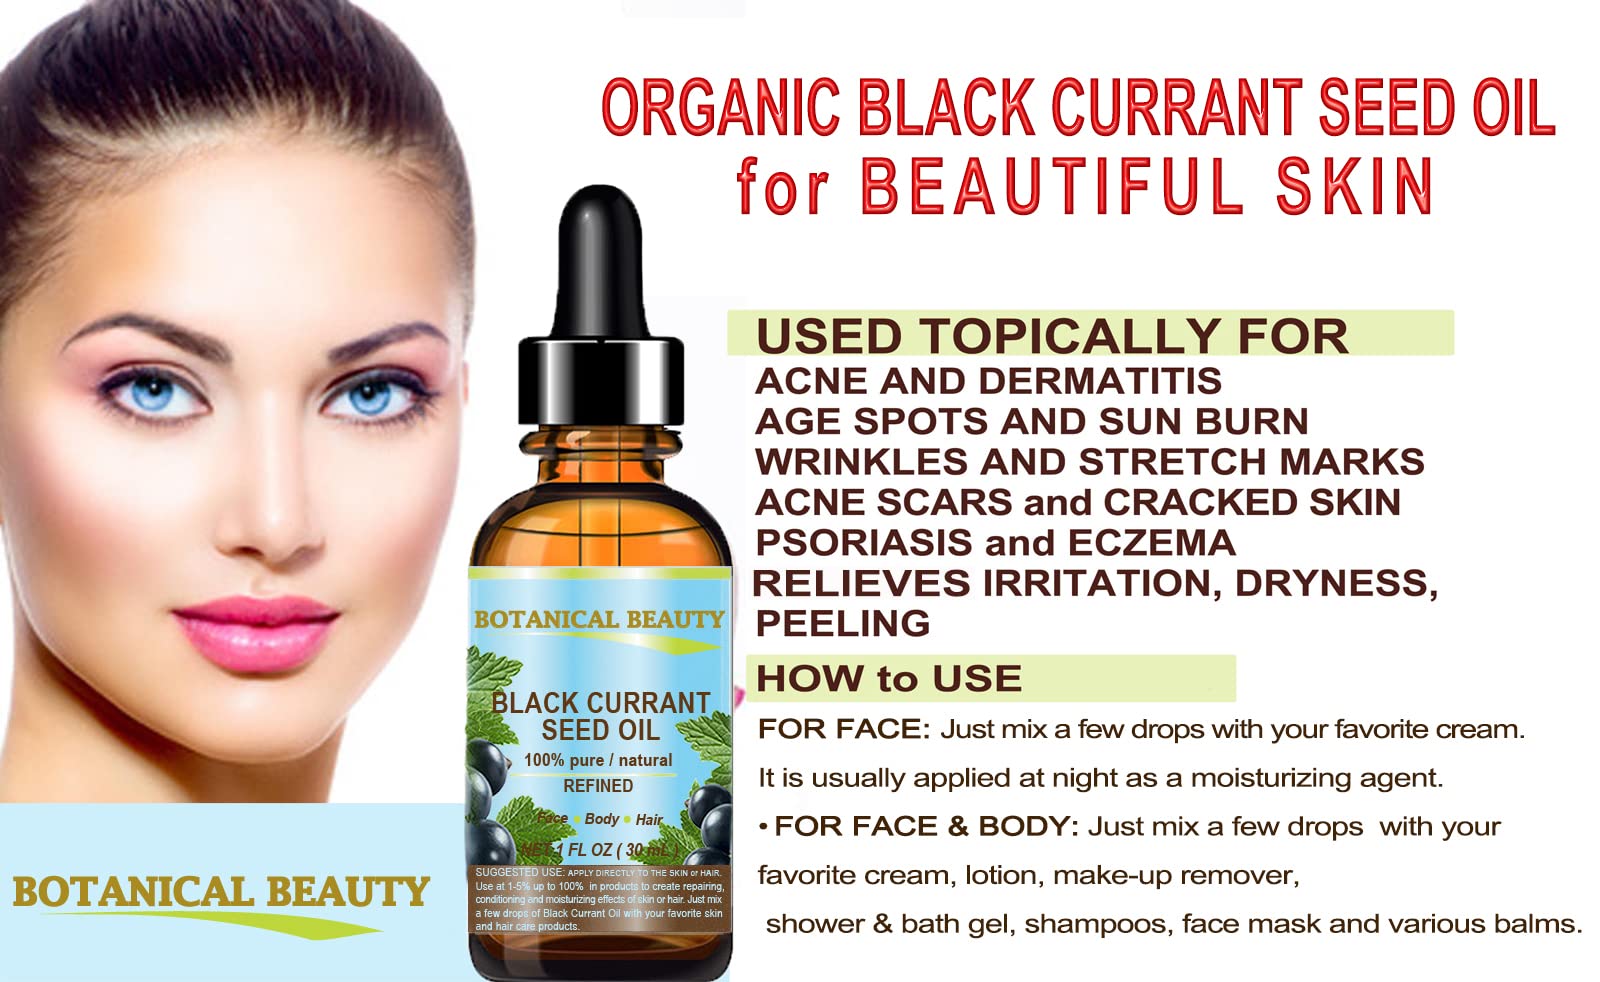 Black Currant Seed Oil. 100% Pure / Natural / Undiluted / Refined Cold Pressed Carrier Oil. 1 Fl.oz. - 30ml. For Skin, Hair, Lip And Nail Care. 